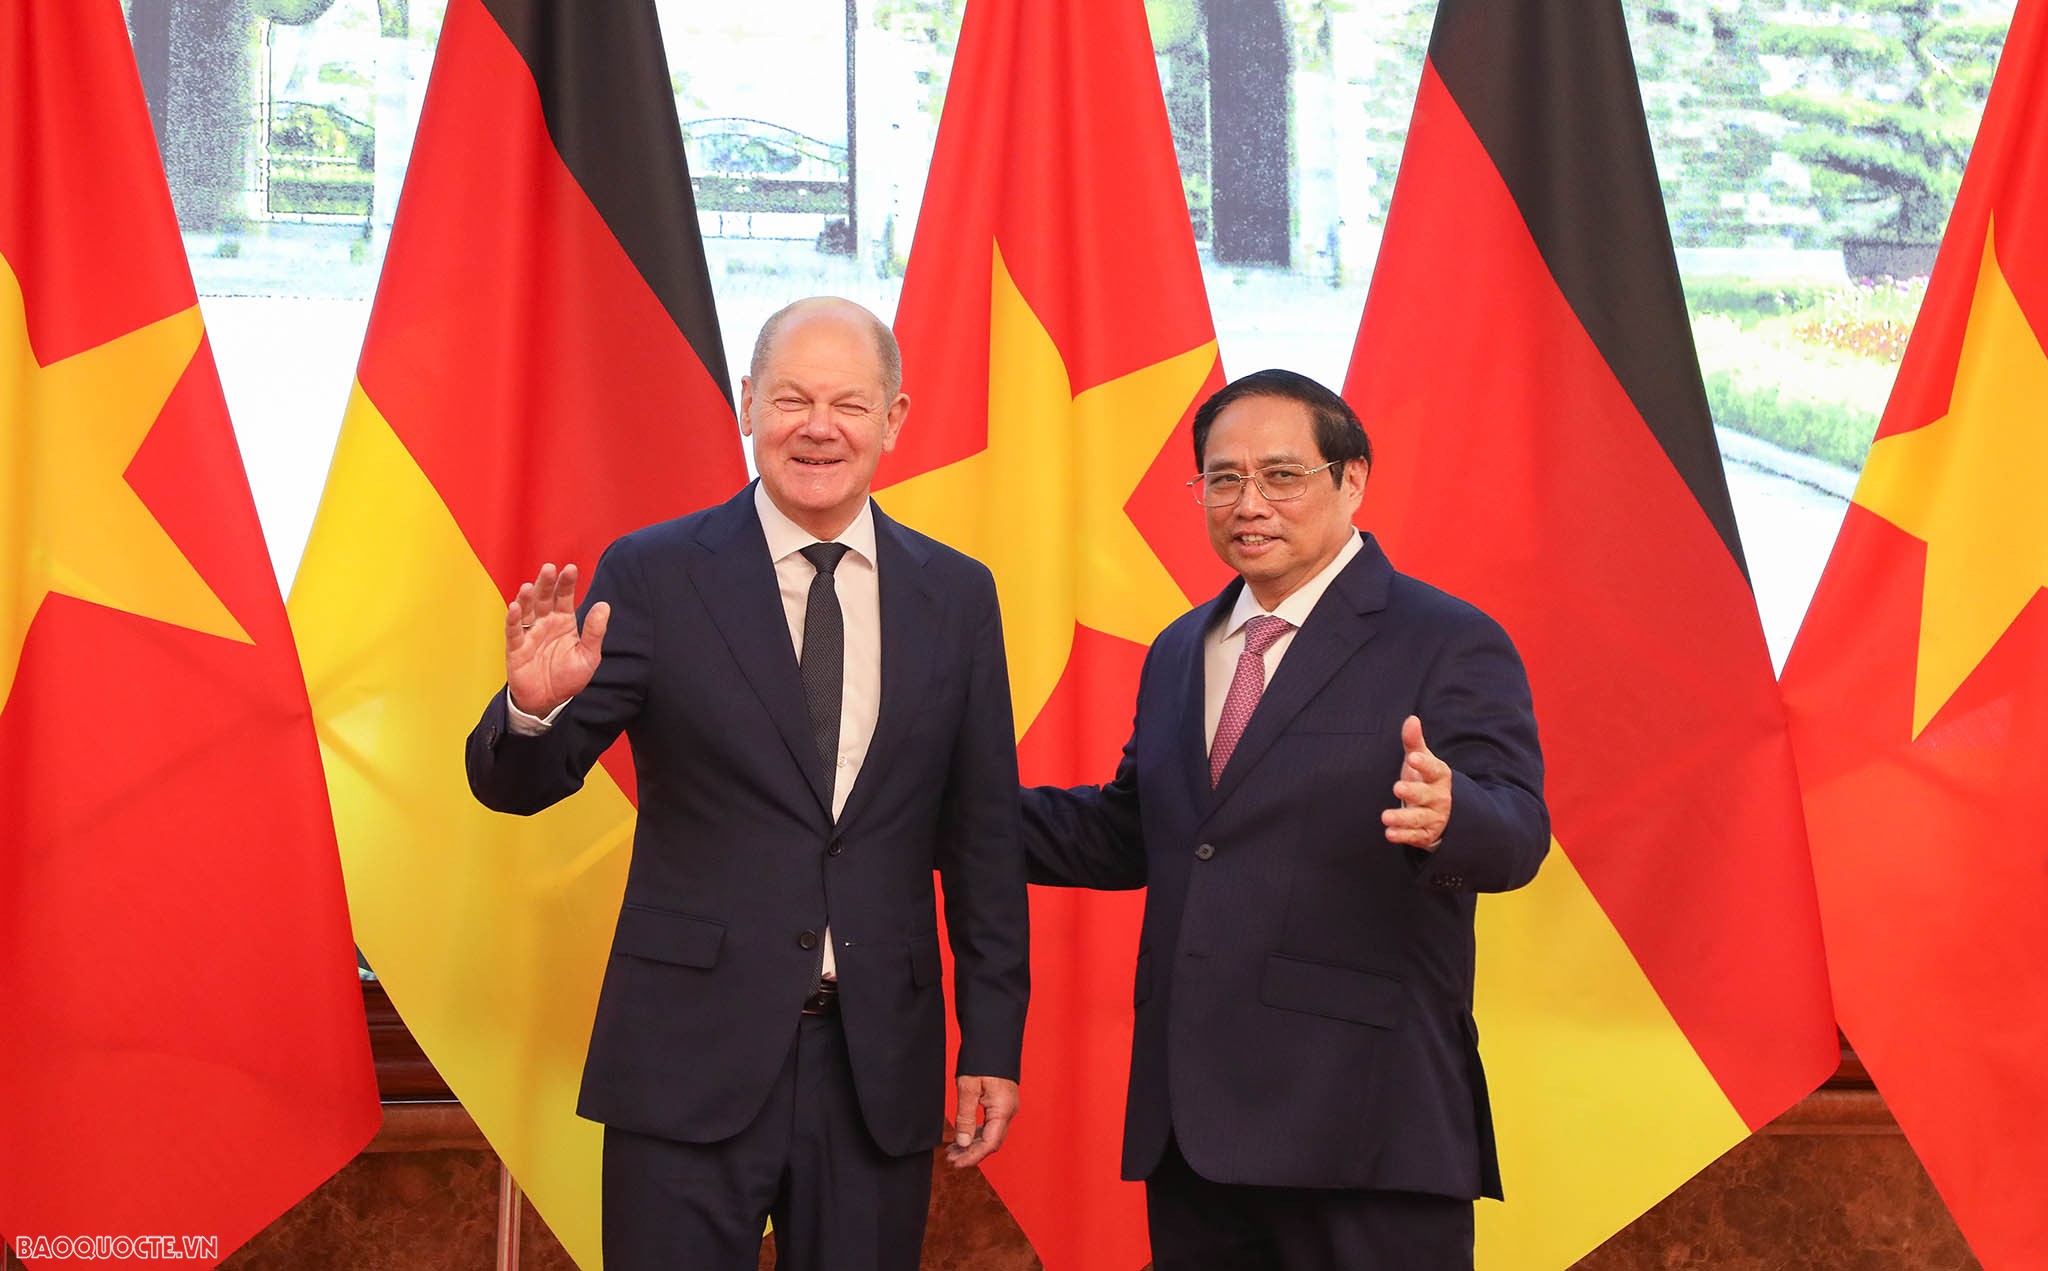 Review on external from Nov. 7-13: German Chancellor’s visit to Vietnam, Prime Minister's busy week in Cambodia